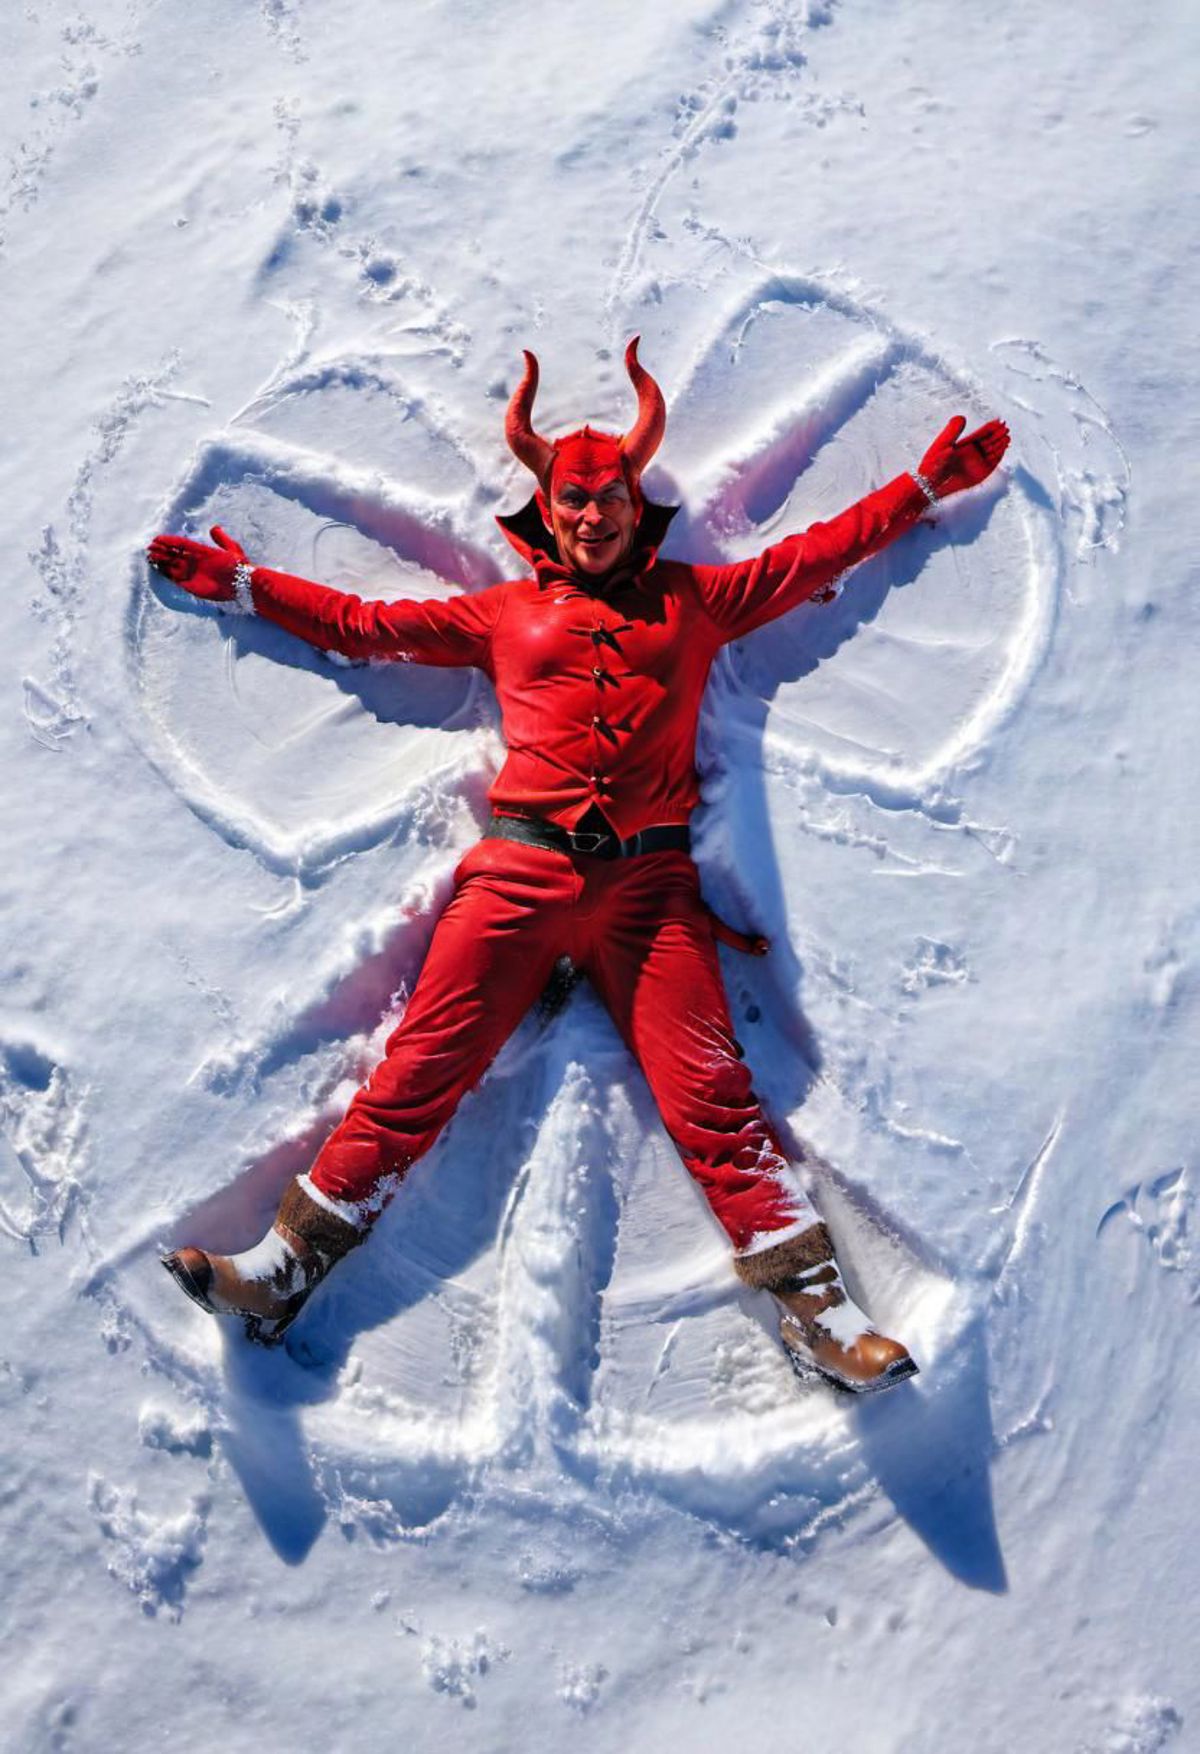 A person in a red devil costume poses in a snowy field.